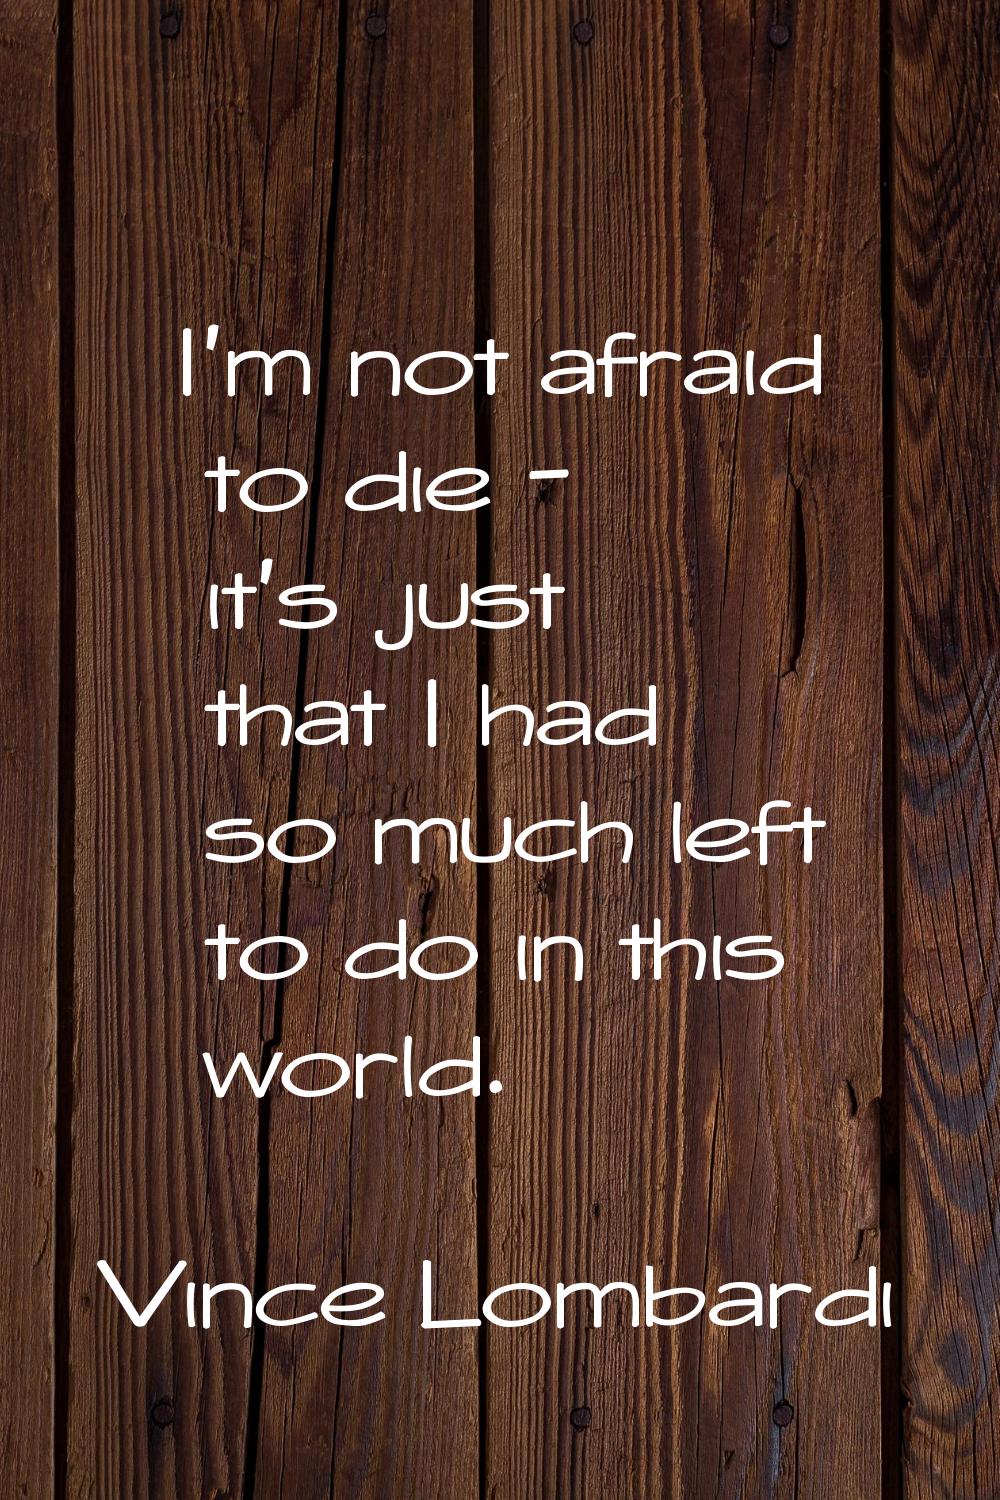 I'm not afraid to die - it's just that I had so much left to do in this world.